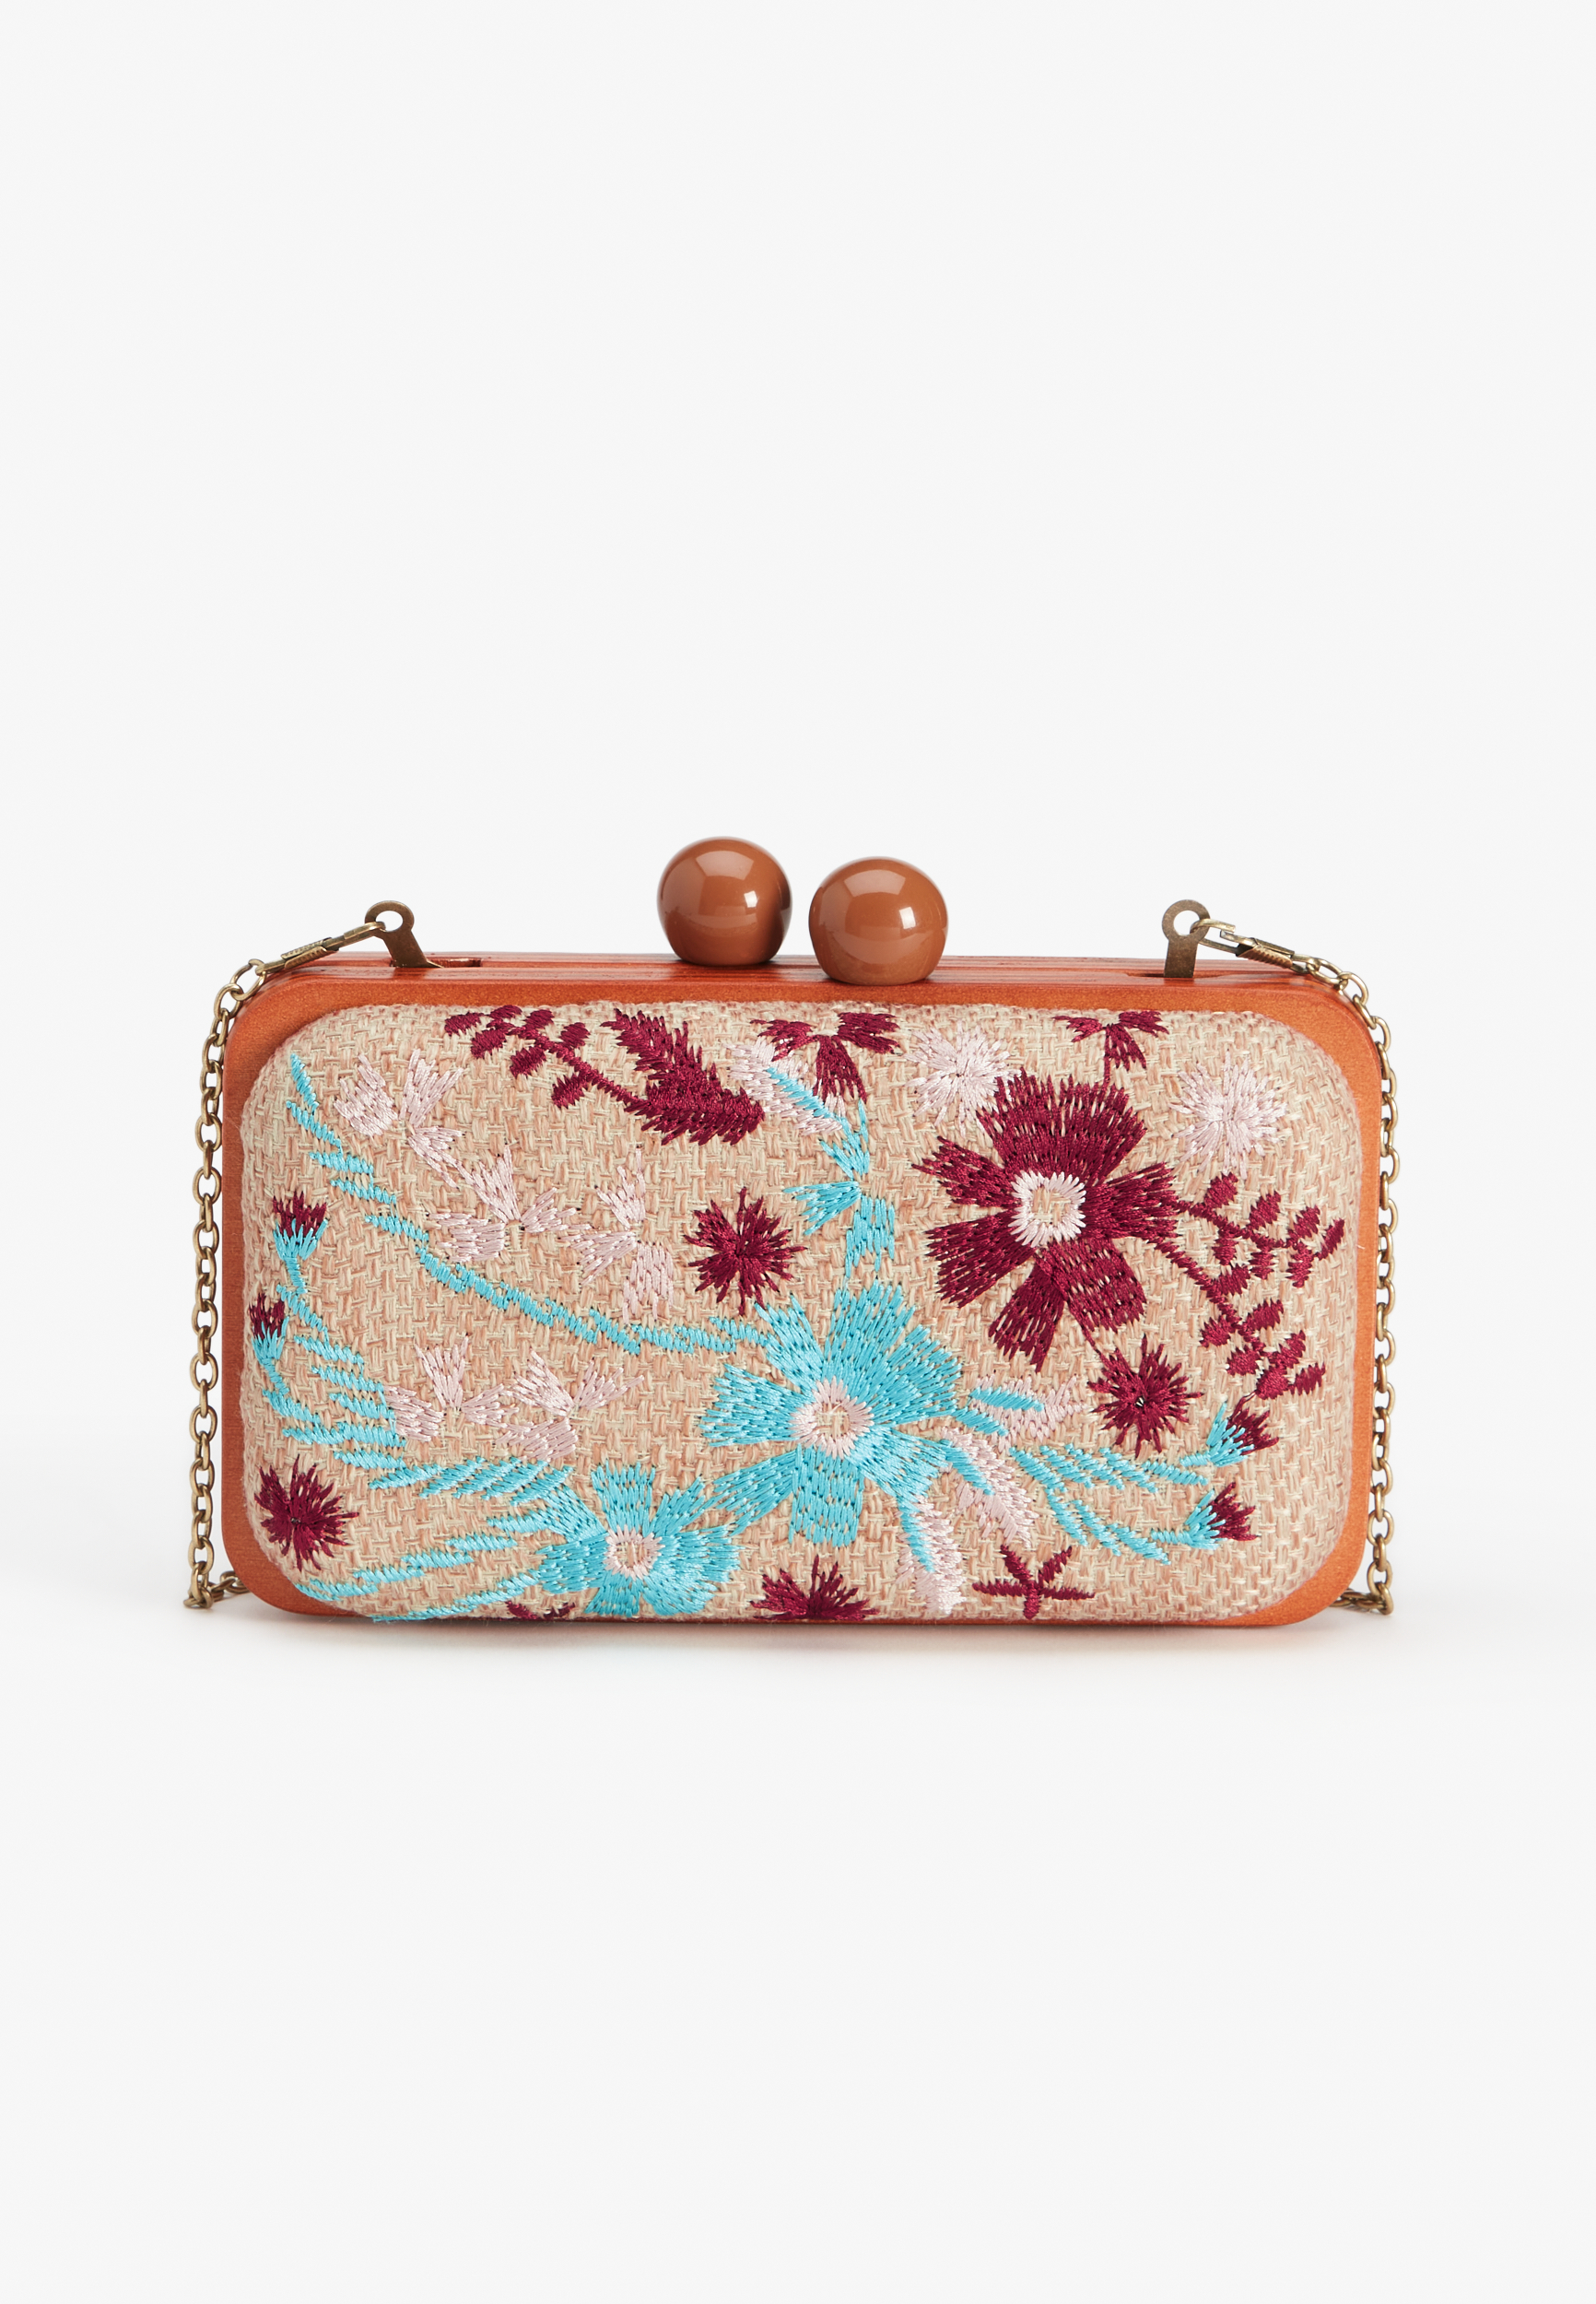 Floral Embroidered Crossbody Clutch | maurices